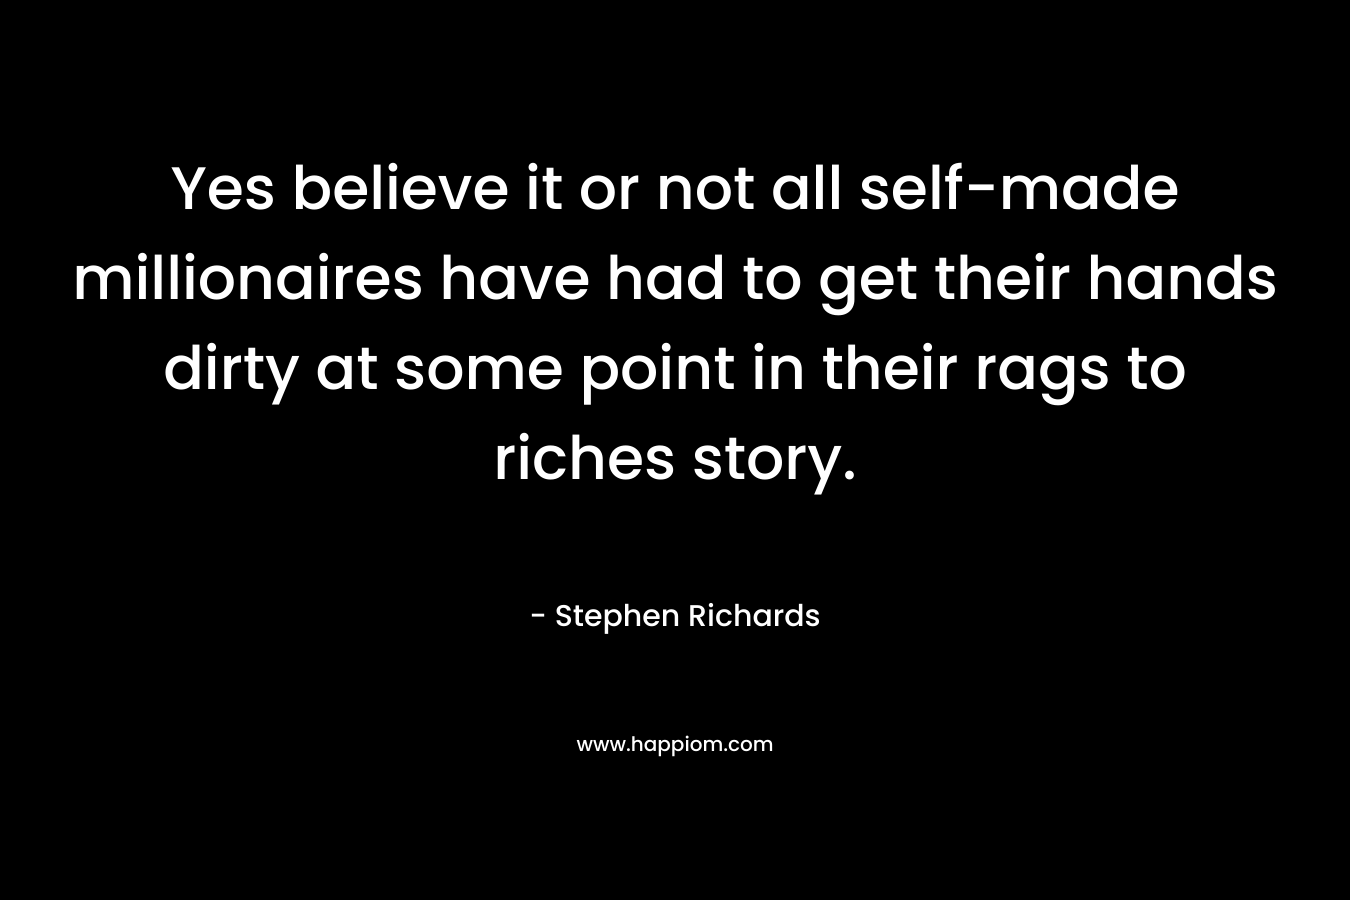 Yes believe it or not all self-made millionaires have had to get their hands dirty at some point in their rags to riches story. – Stephen Richards